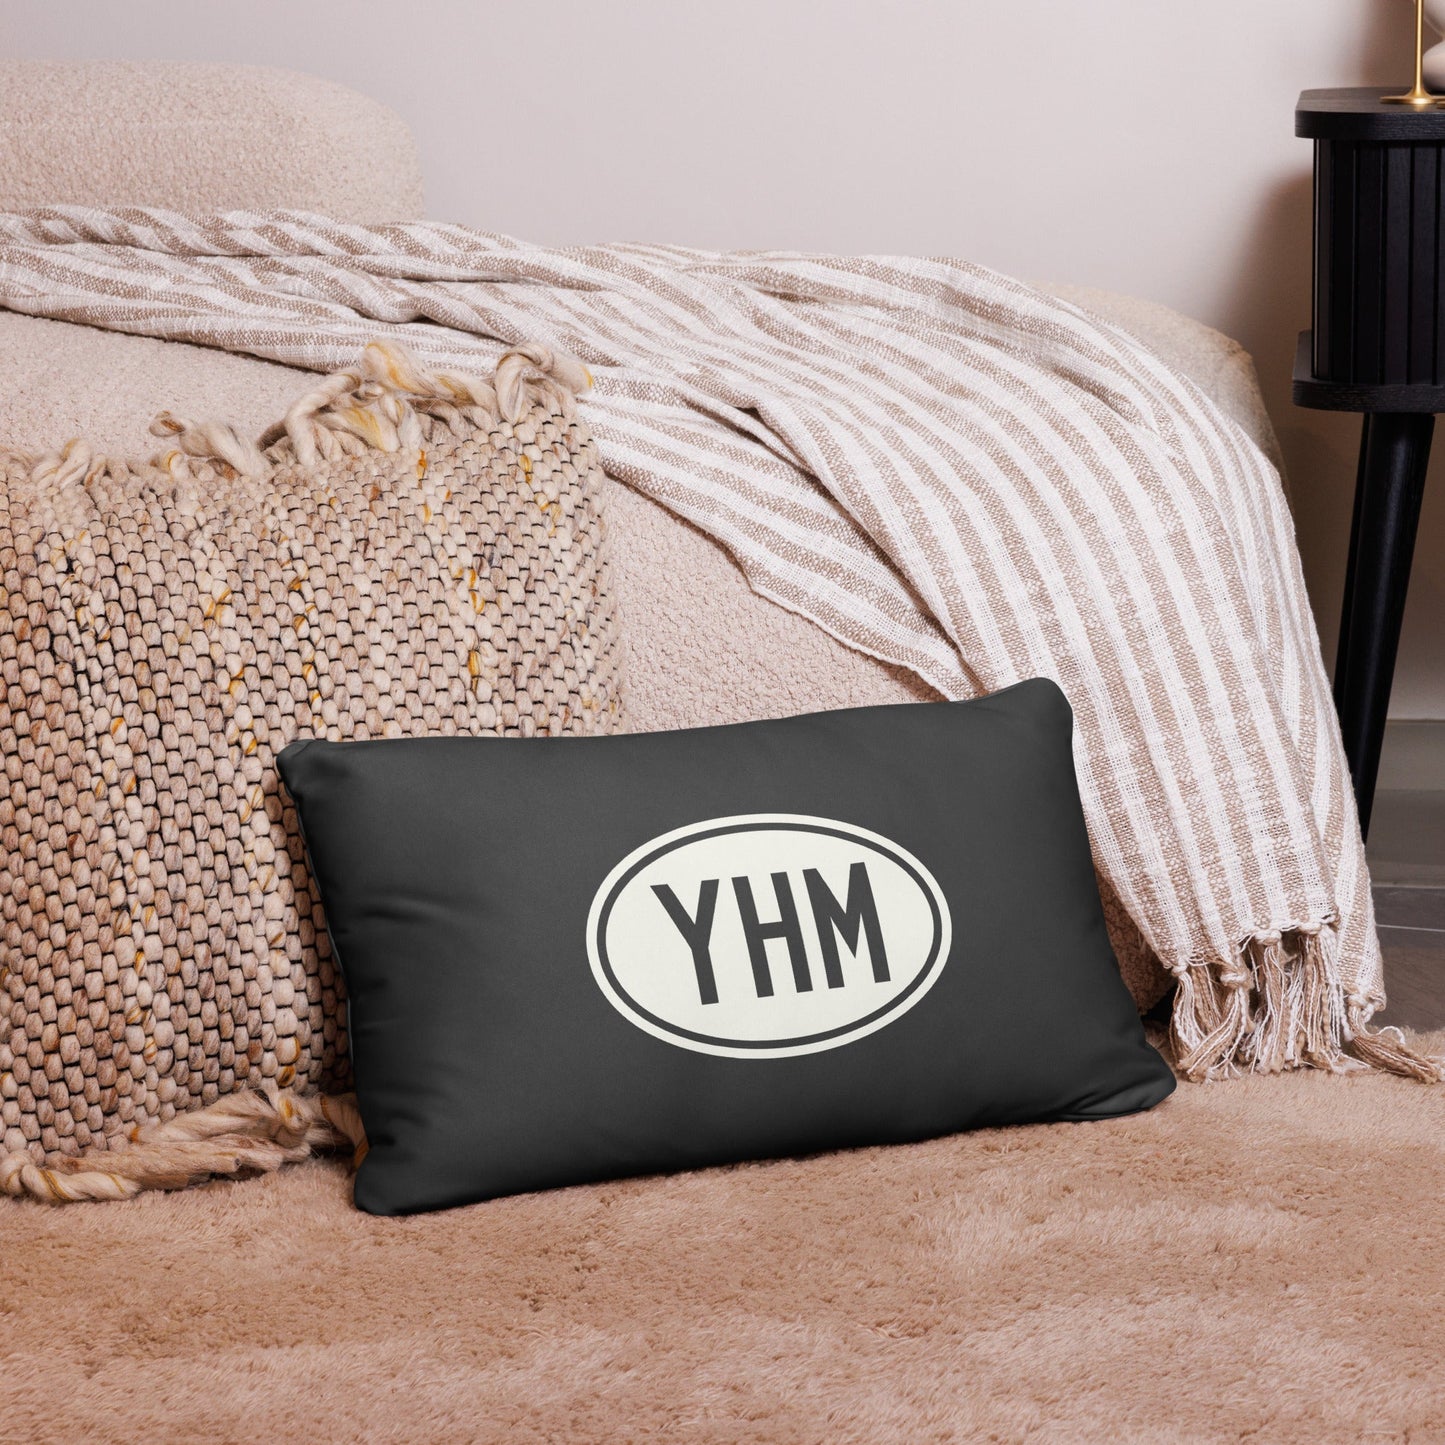 Unique Travel Gift Throw Pillow - White Oval • YQT Thunder Bay • YHM Designs - Image 05